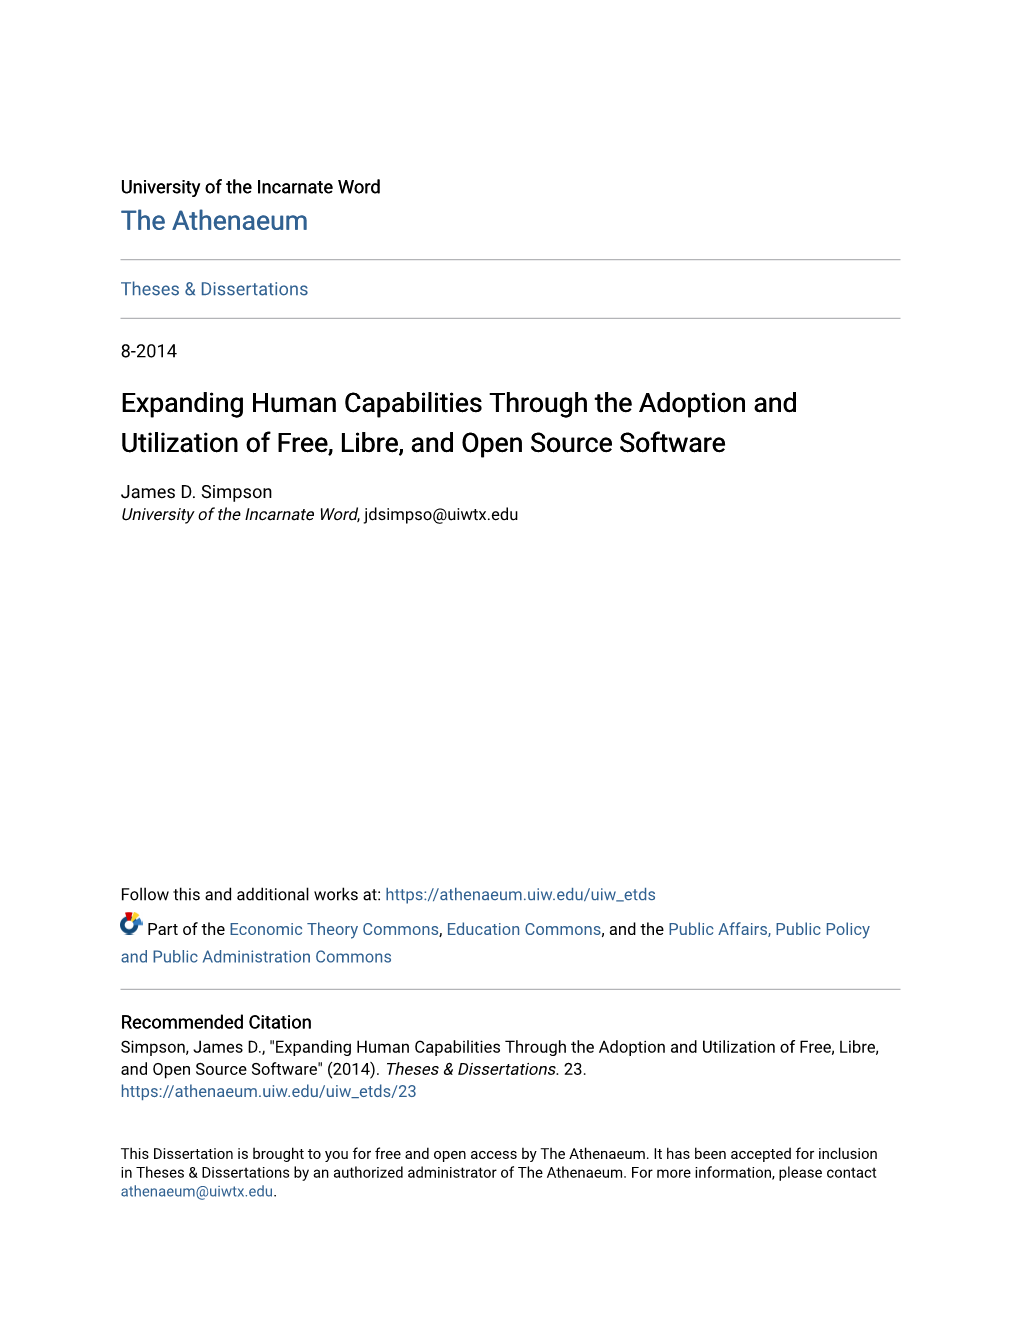 Expanding Human Capabilities Through the Adoption and Utilization of Free, Libre, and Open Source Software